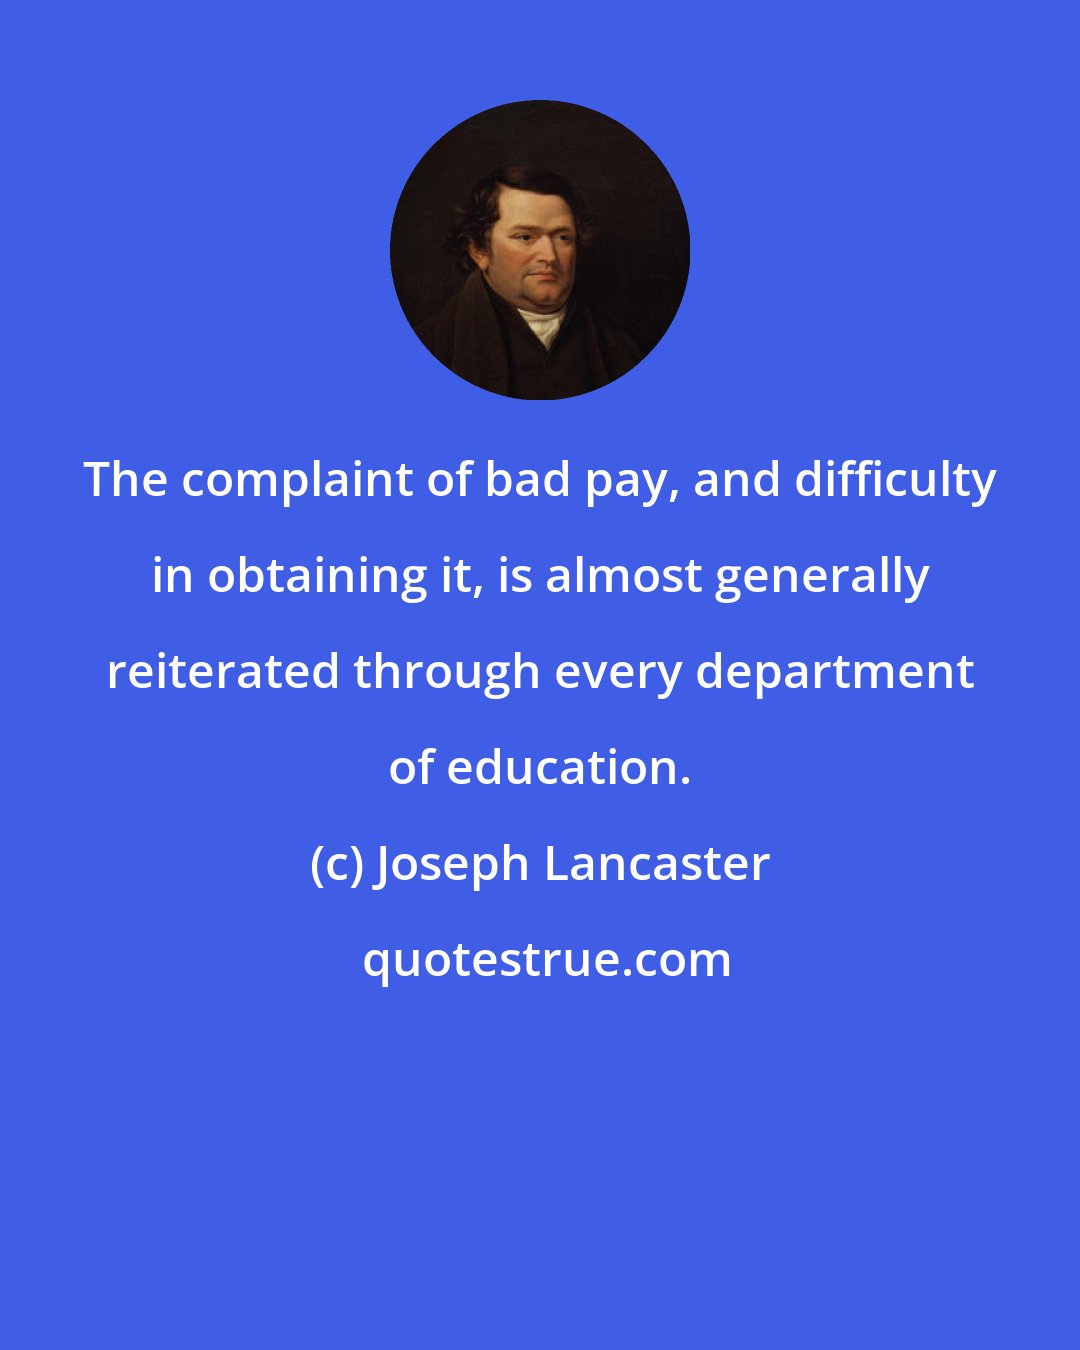 Joseph Lancaster: The complaint of bad pay, and difficulty in obtaining it, is almost generally reiterated through every department of education.